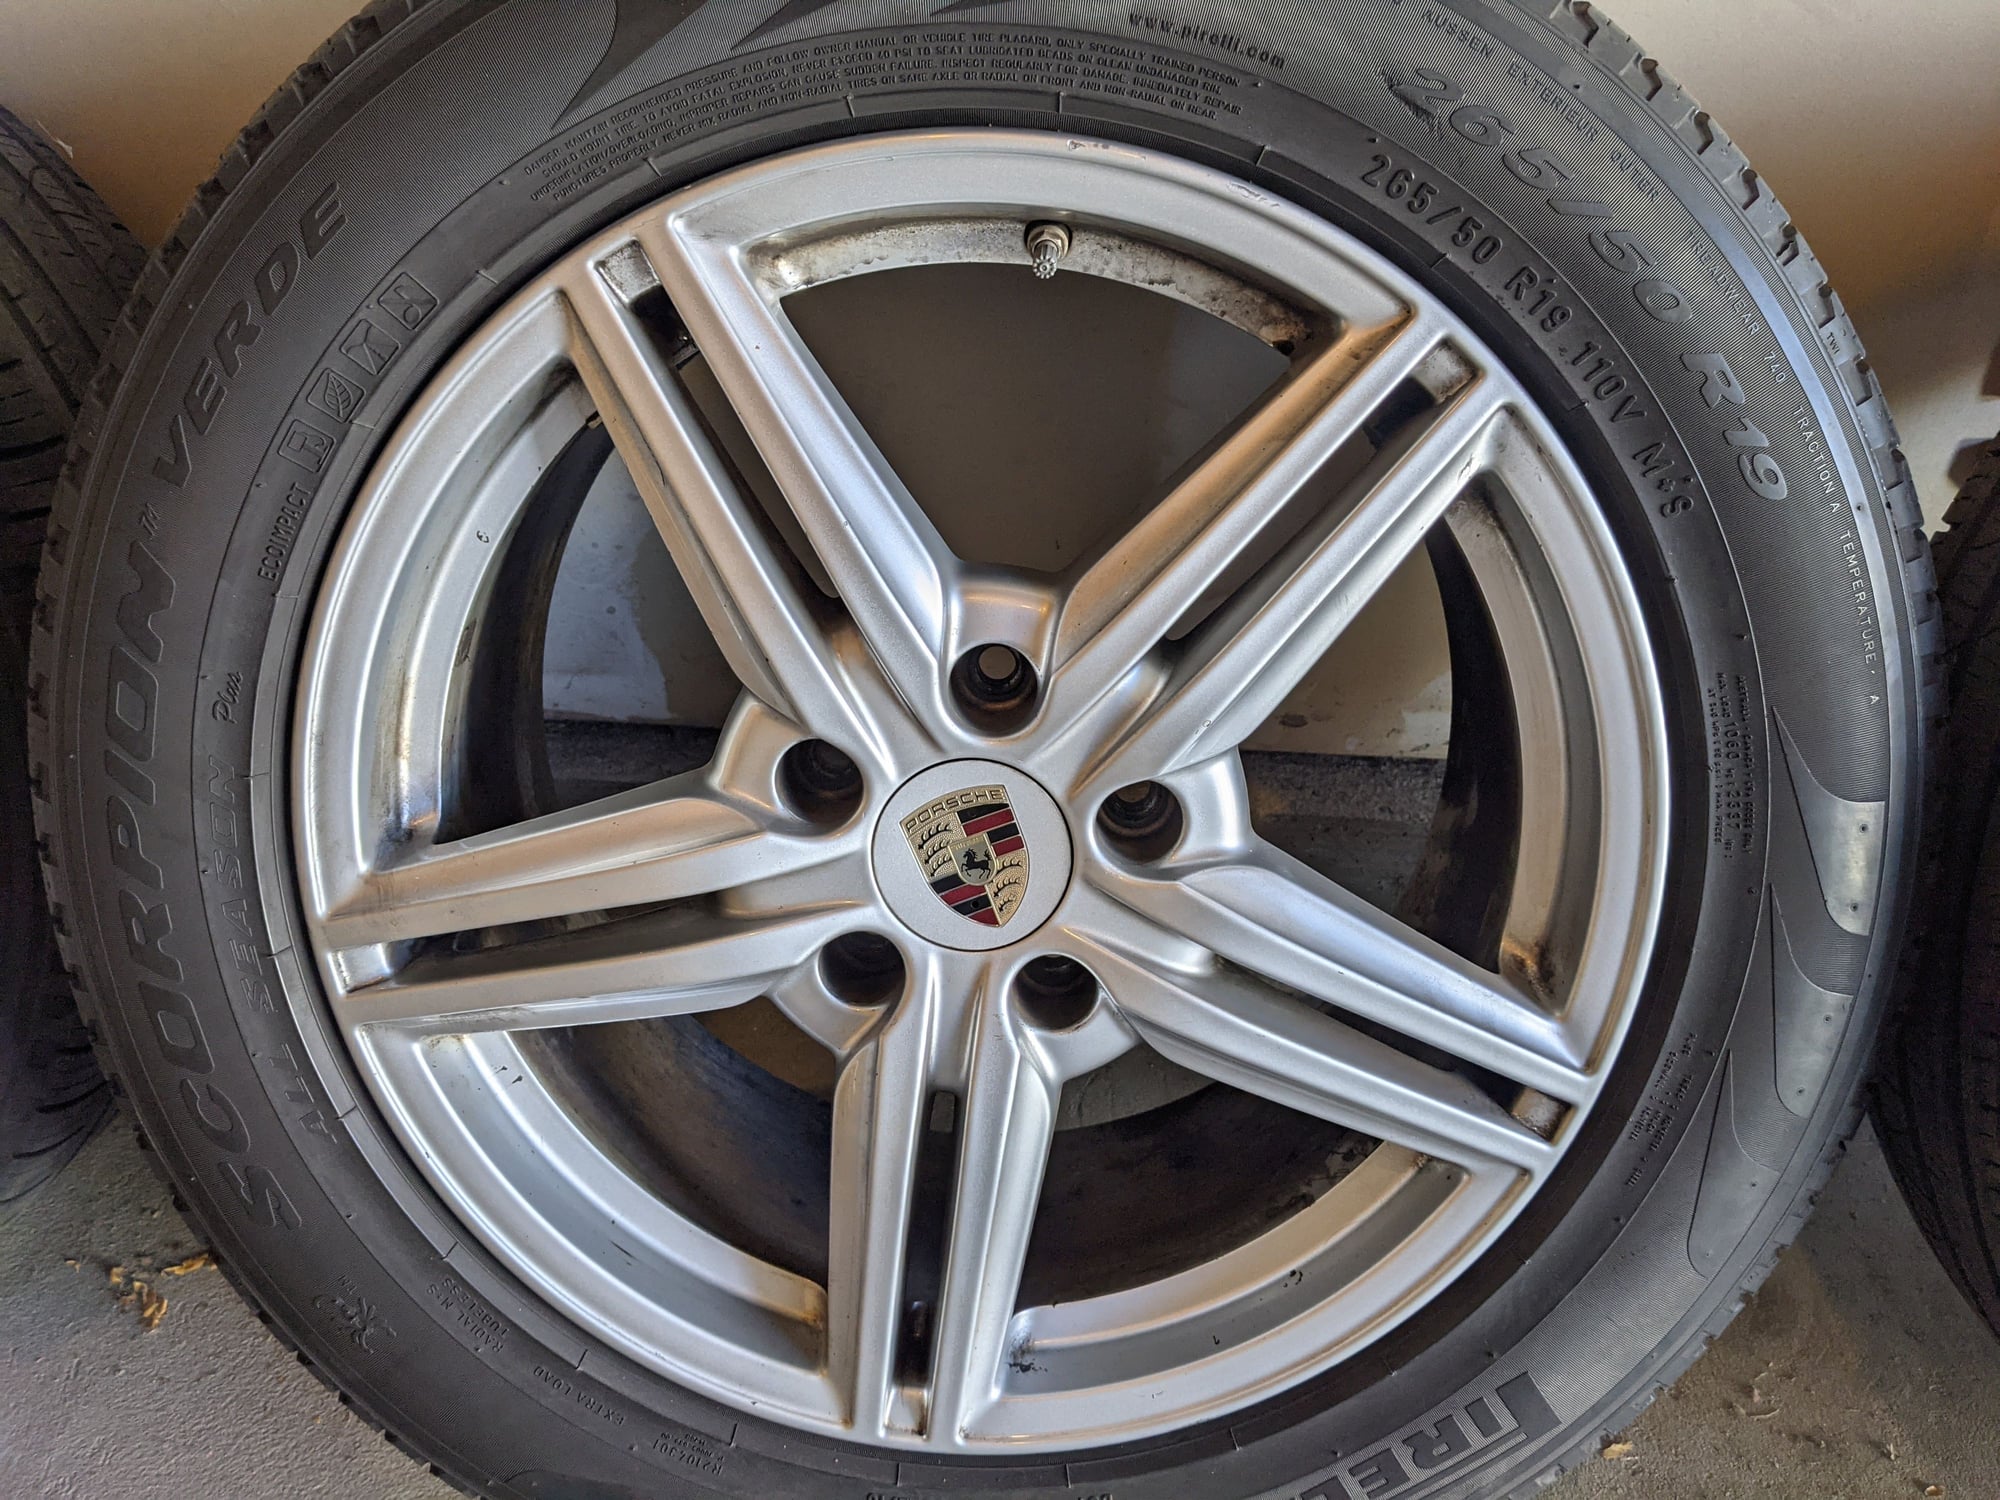 Wheels and Tires/Axles - Set of 4 19" Cayenne Design II Wheel+Tires w/ TPMS and center caps - Used - 2011 to 2018 Porsche Cayenne - Denver, CO 80528, United States